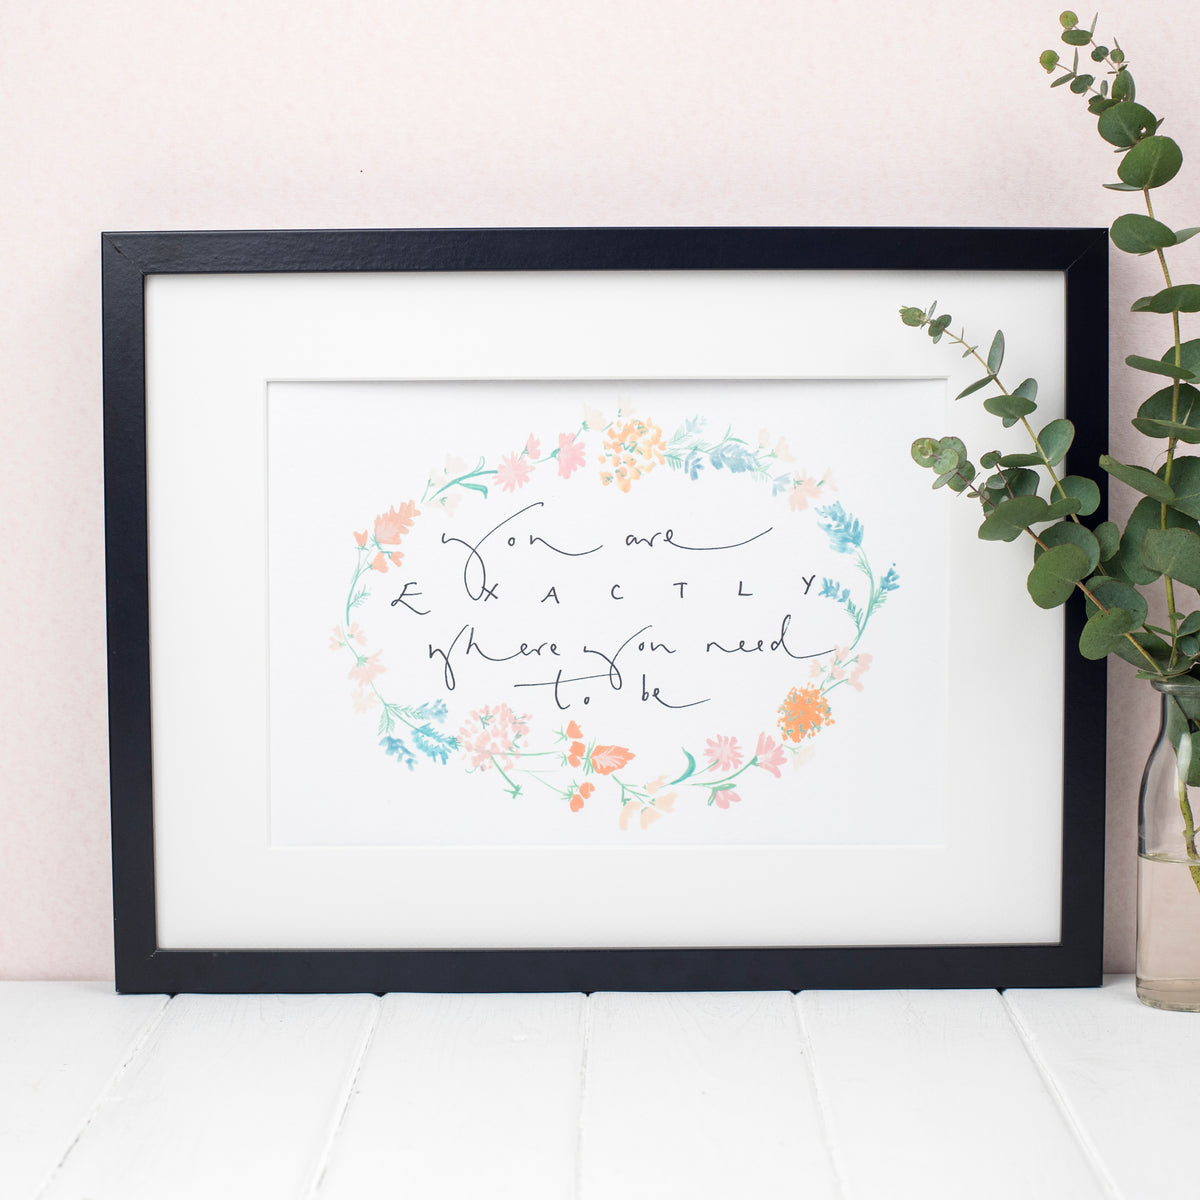 'You Are Exactly Where You Need To Be' Floral Watercolour Print